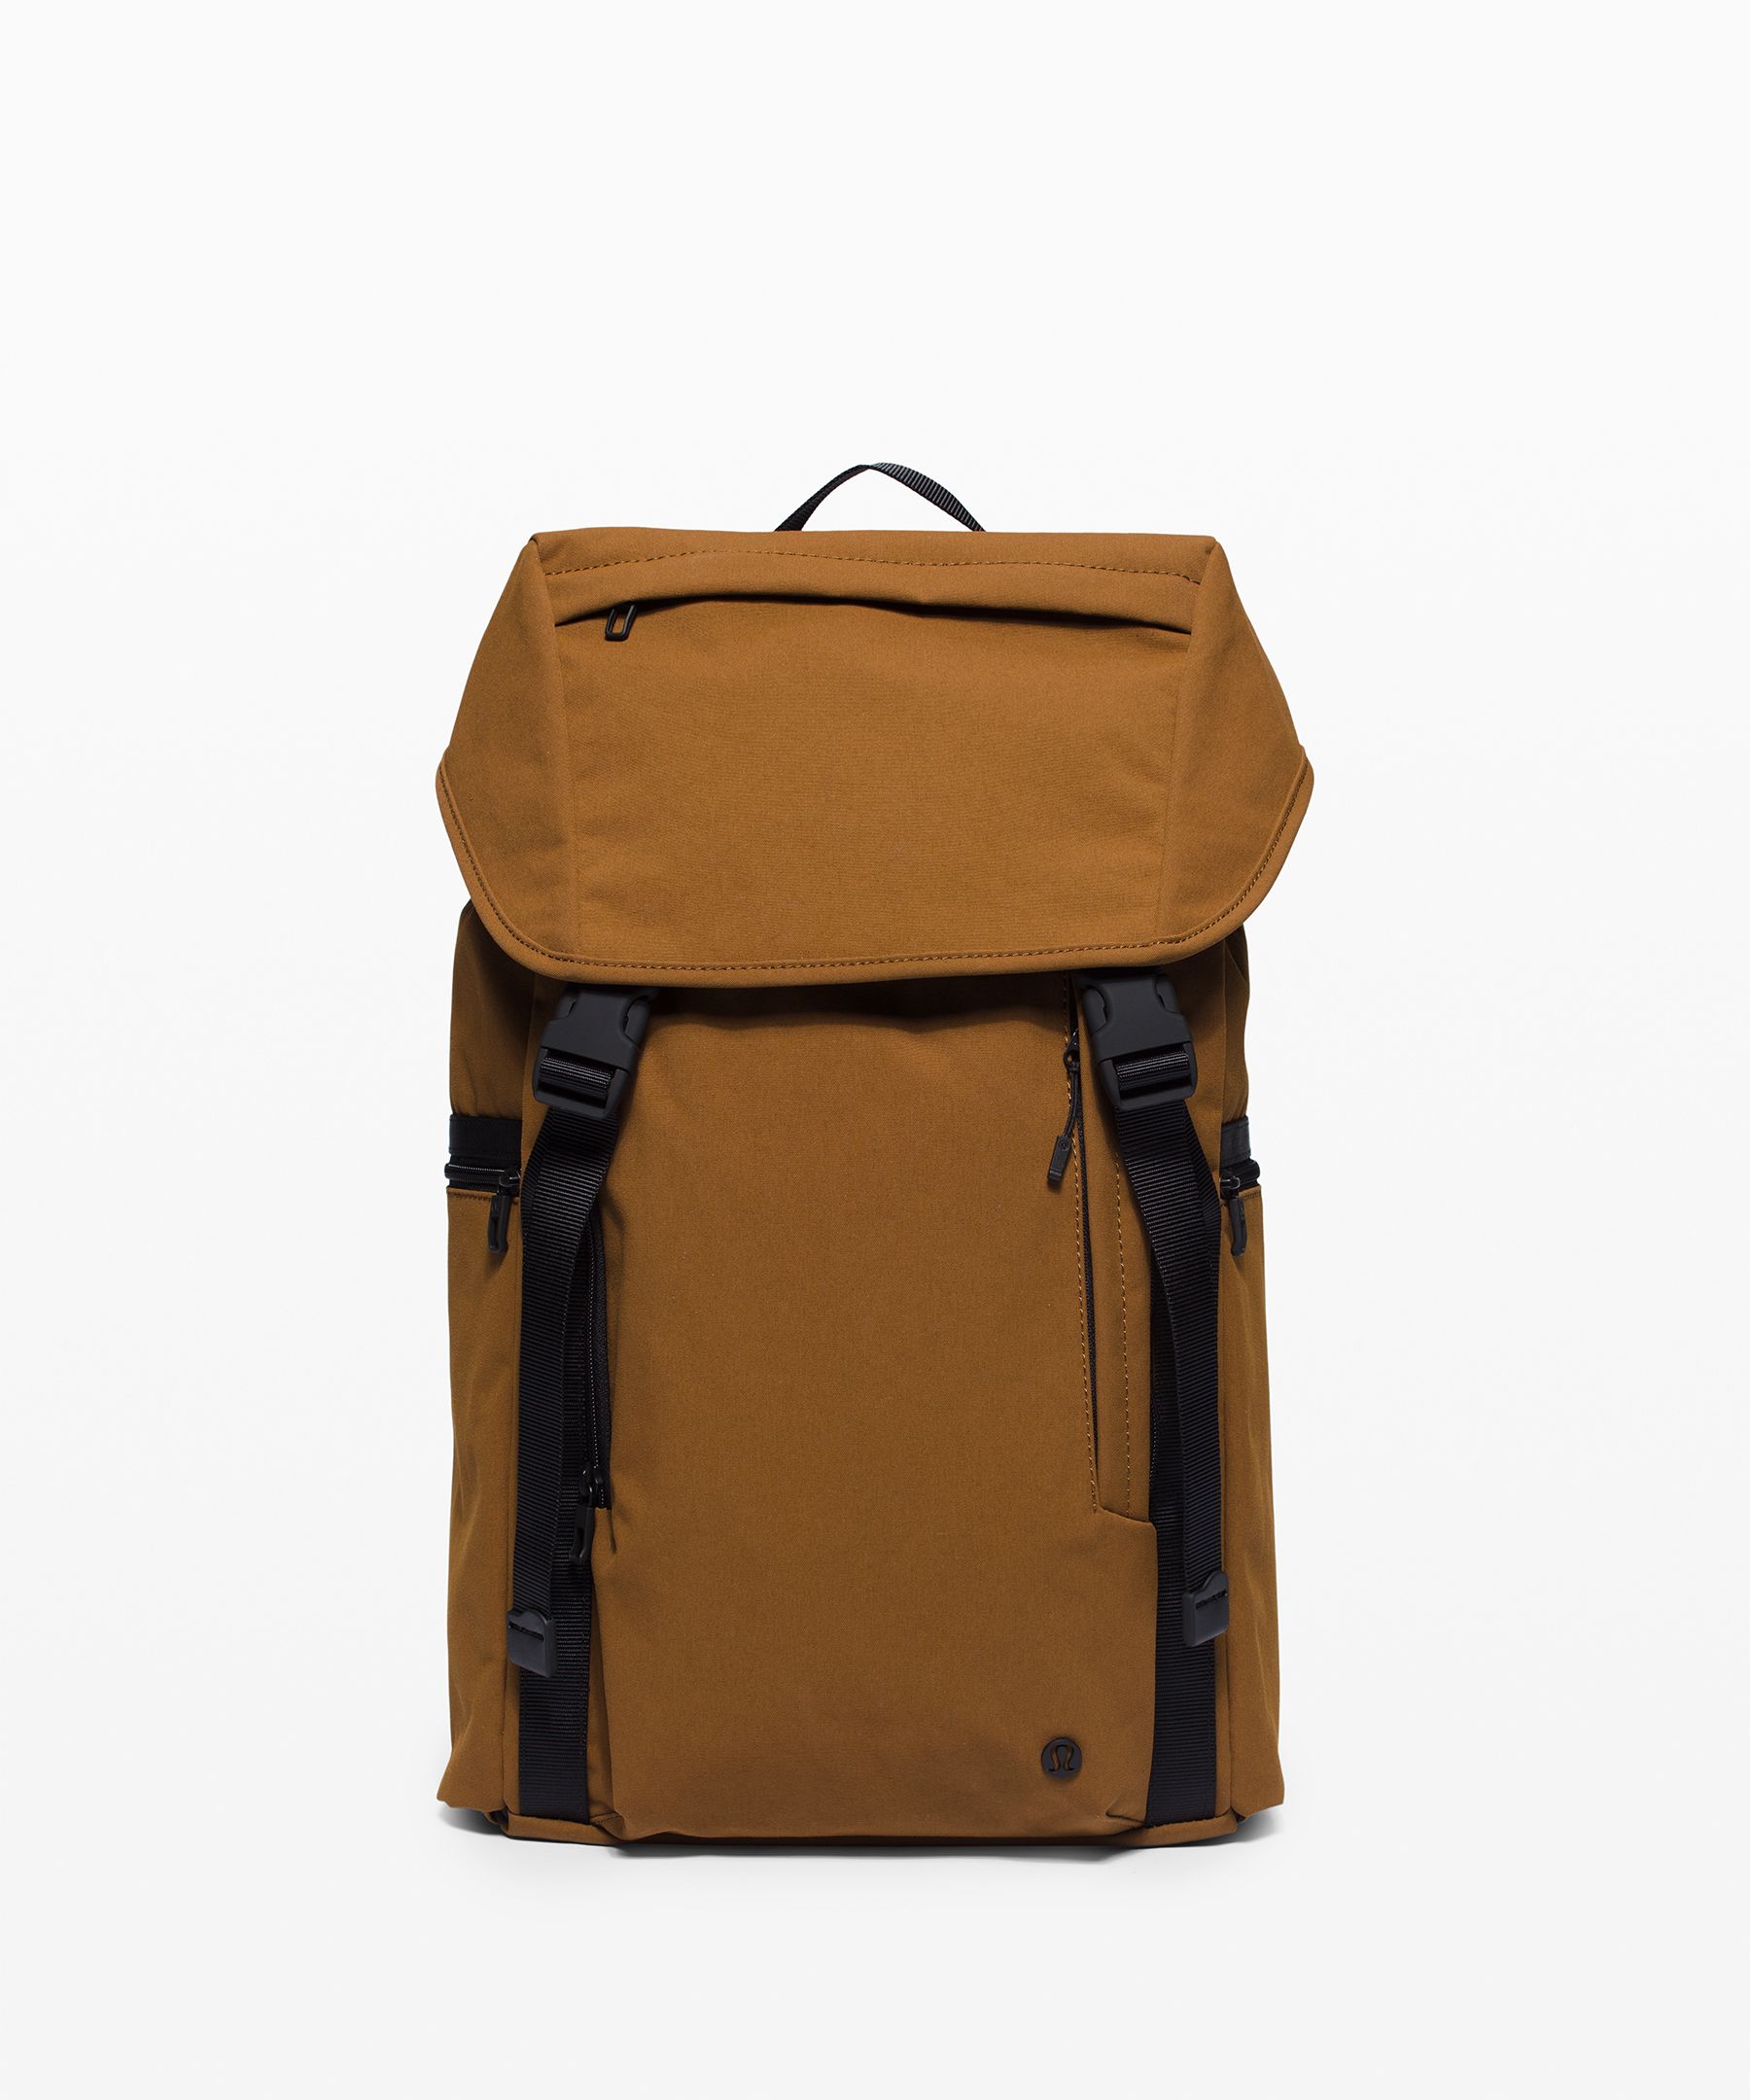 lululemon day out backpack